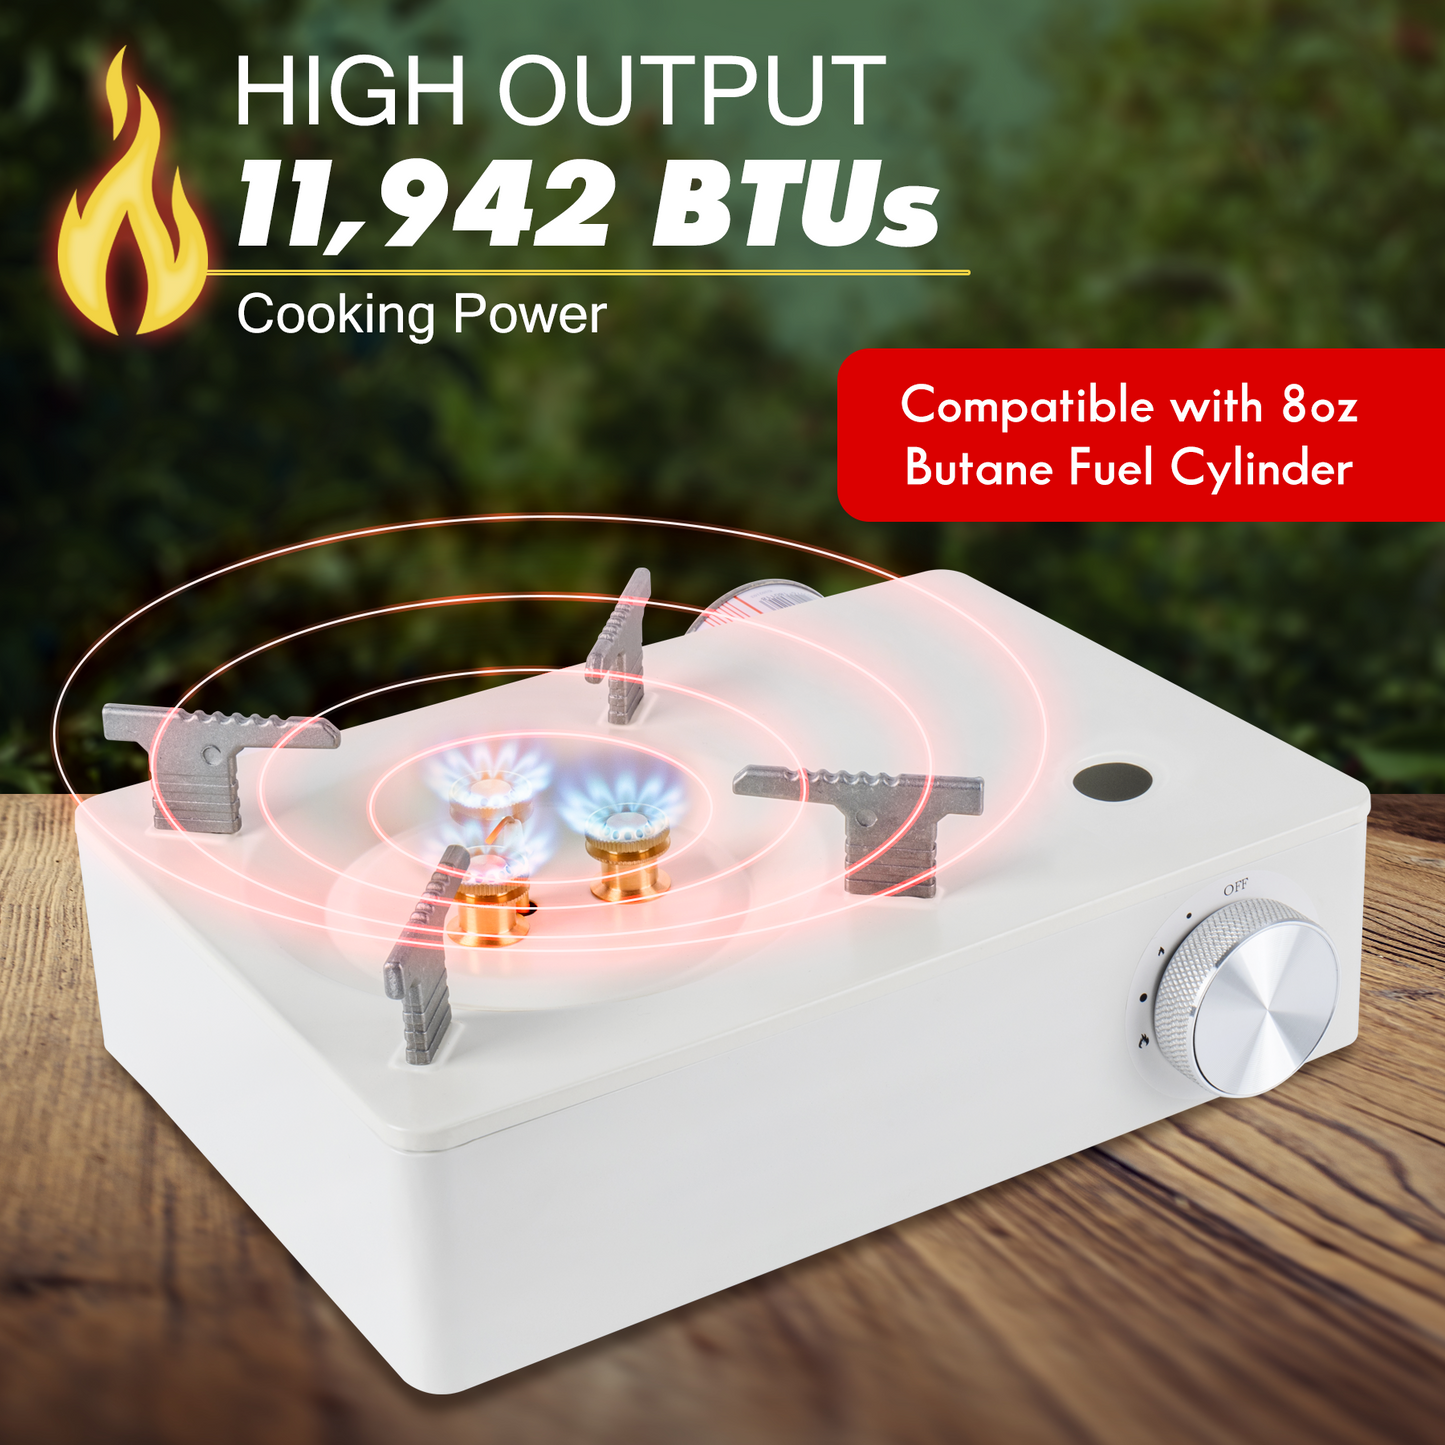 high output 11,942 BTUs cooking power